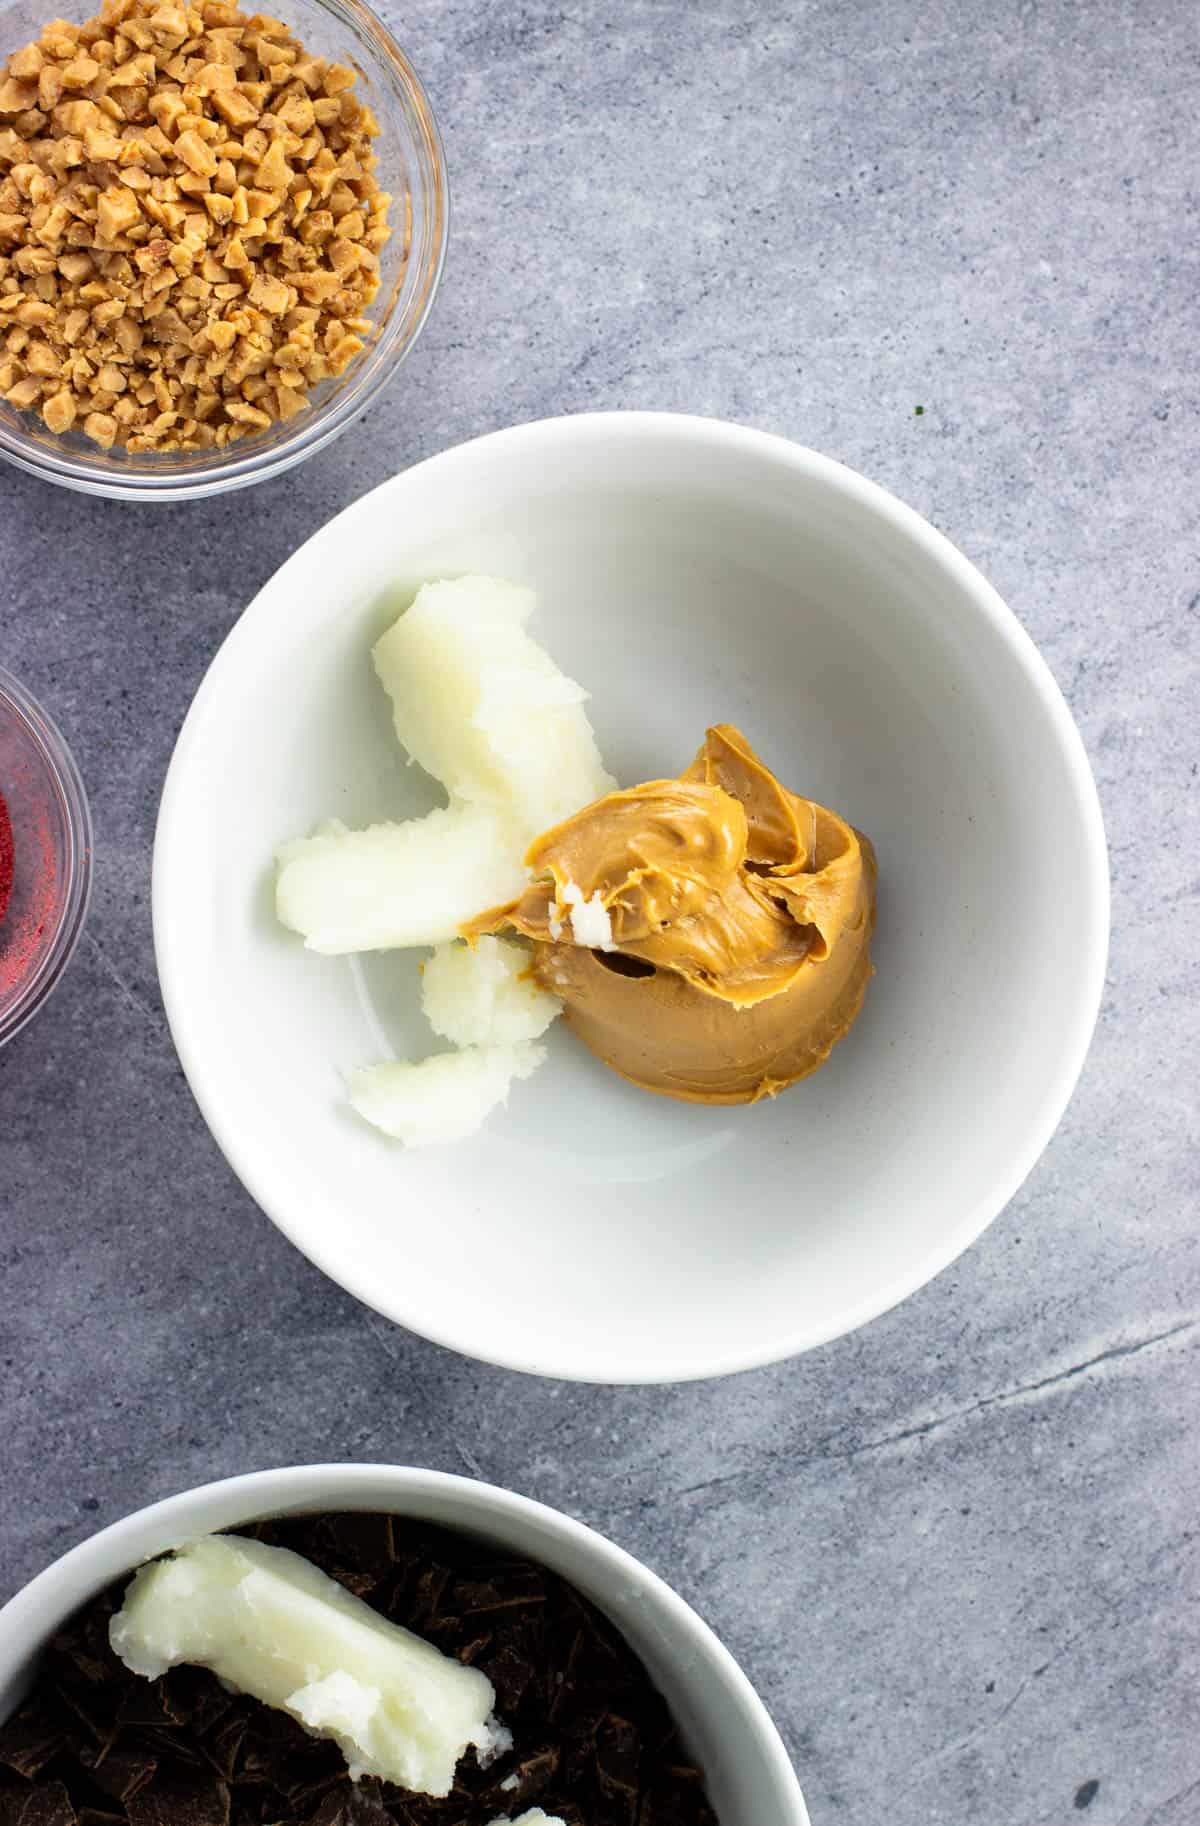 Creamy peanut butter and coconut oil in a bowl before melting.